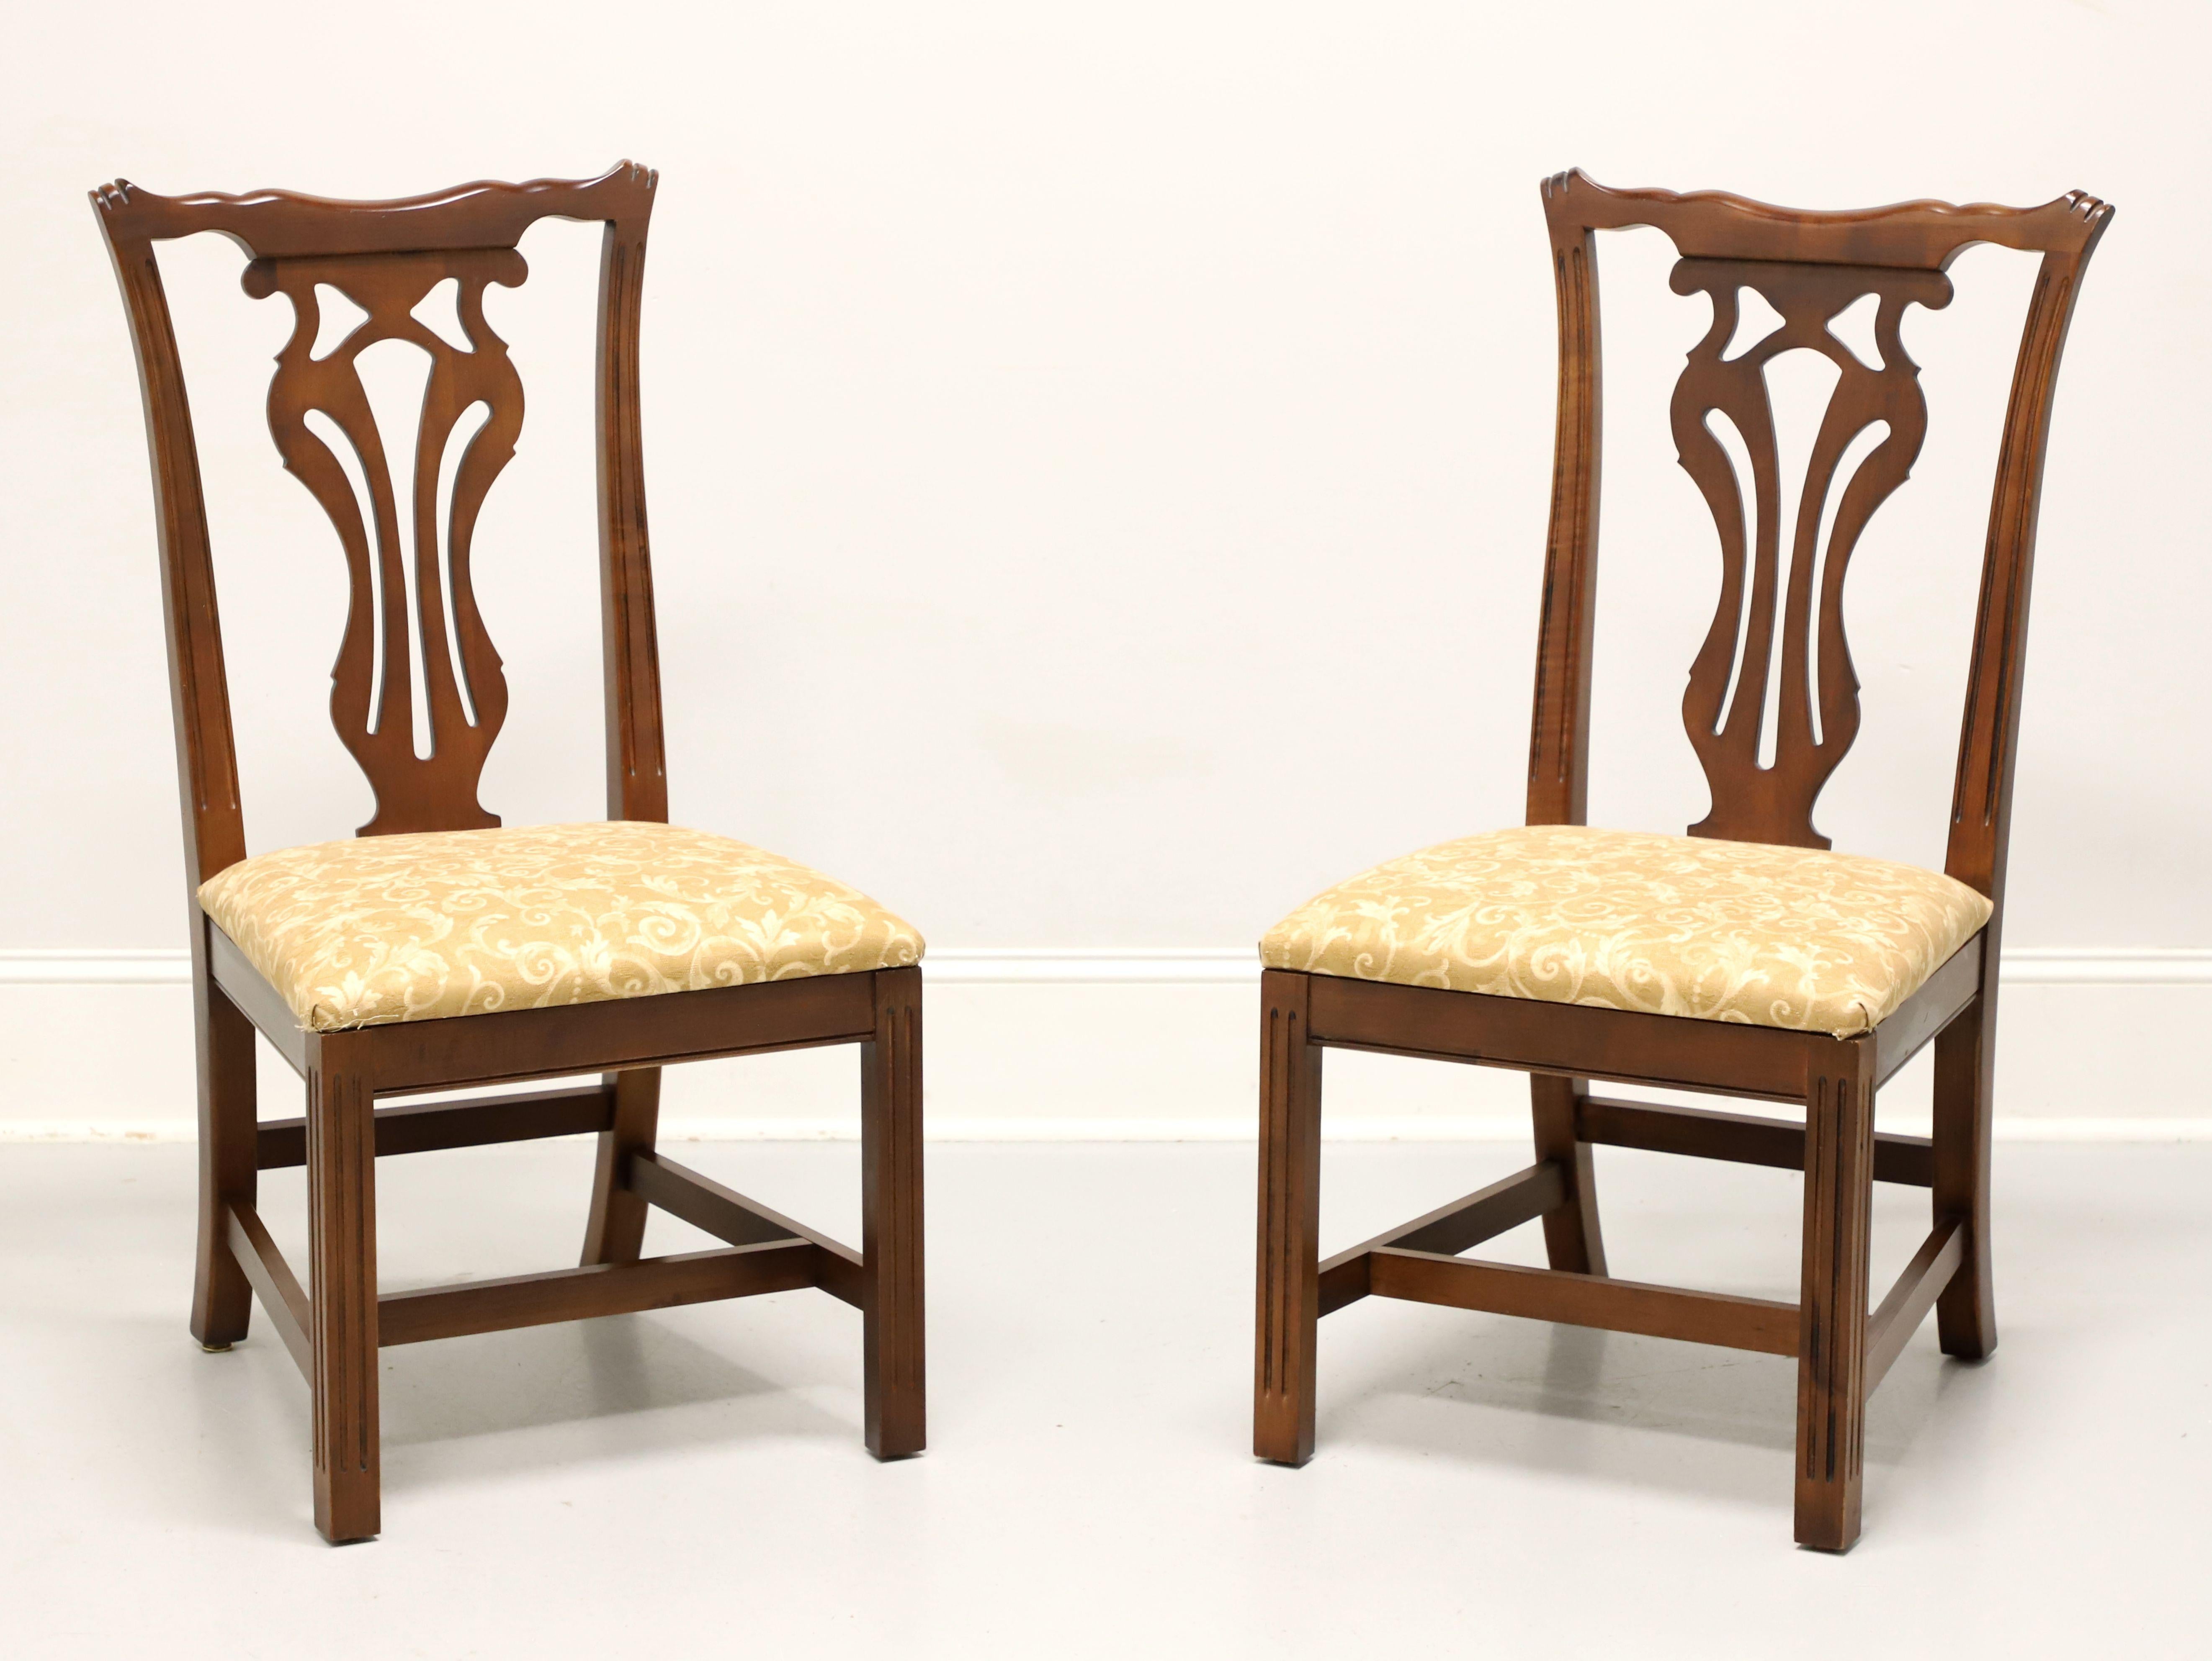 KNOB CREEK Mahogany Chippendale Dining Side Chairs - Pair C For Sale 7